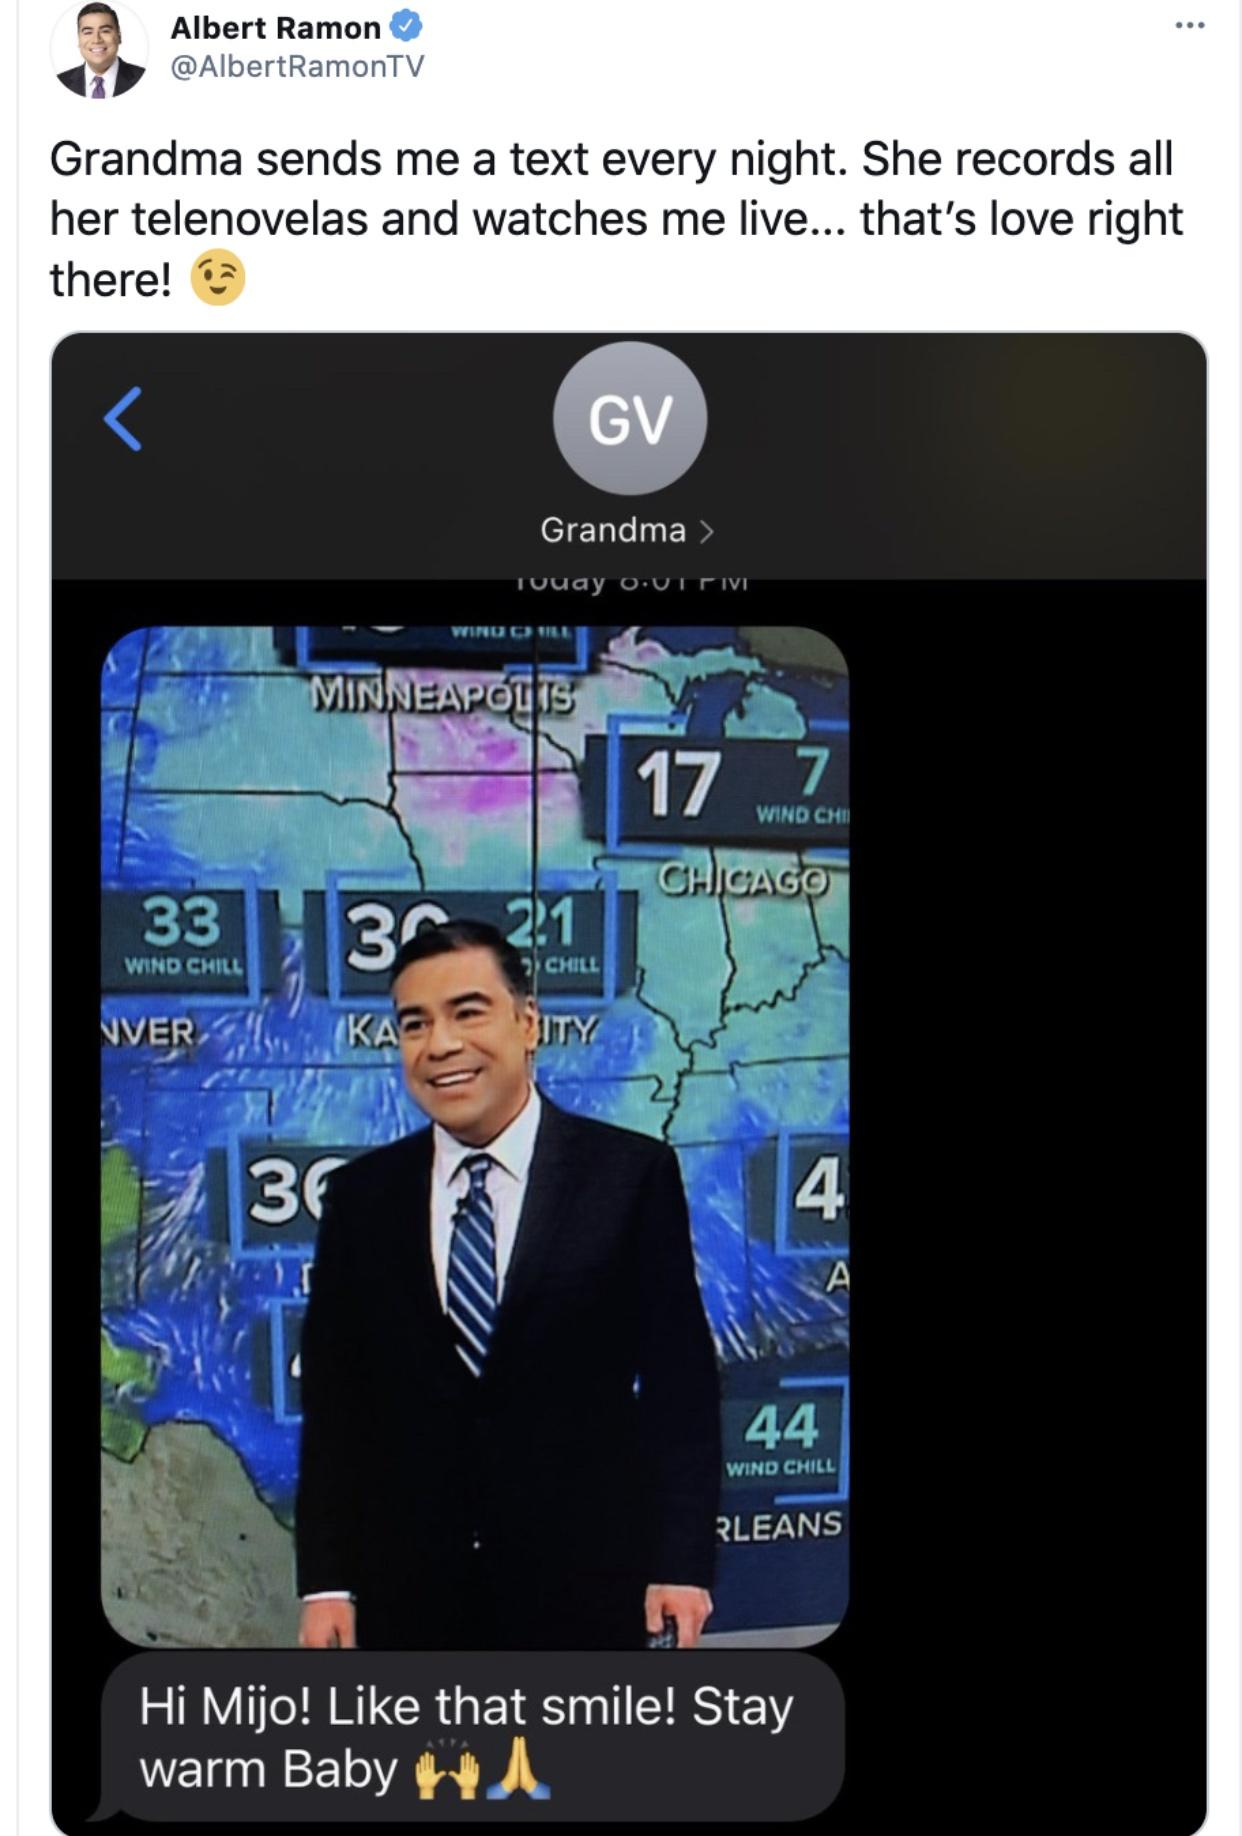 multimedia - ... Albert Ramon Grandma sends me a text every night. She records all her telenovelas and watches me live... that's love right there! Gv Grandma > TUuay Ultivi Minneapolis 17 7 Wind Chi Chicago 33 3 21 Wind Chill Chill Nversi, Ka Sity 36 4 44